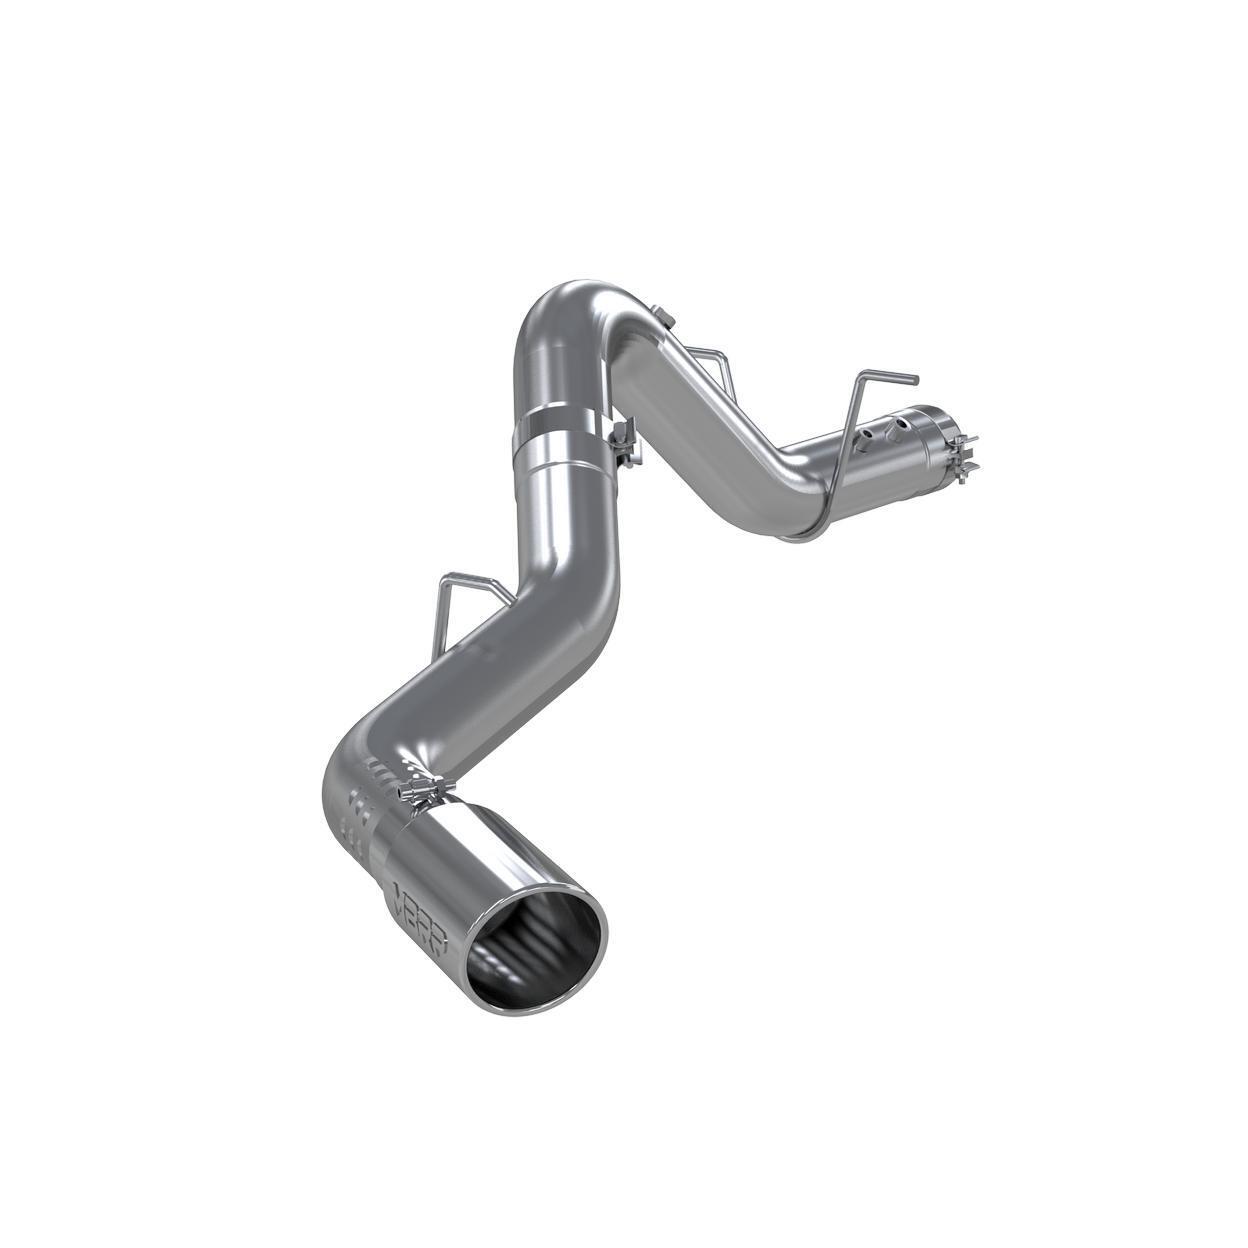 Exhaust System Kit for 2021 GMC Sierra 2500 HD